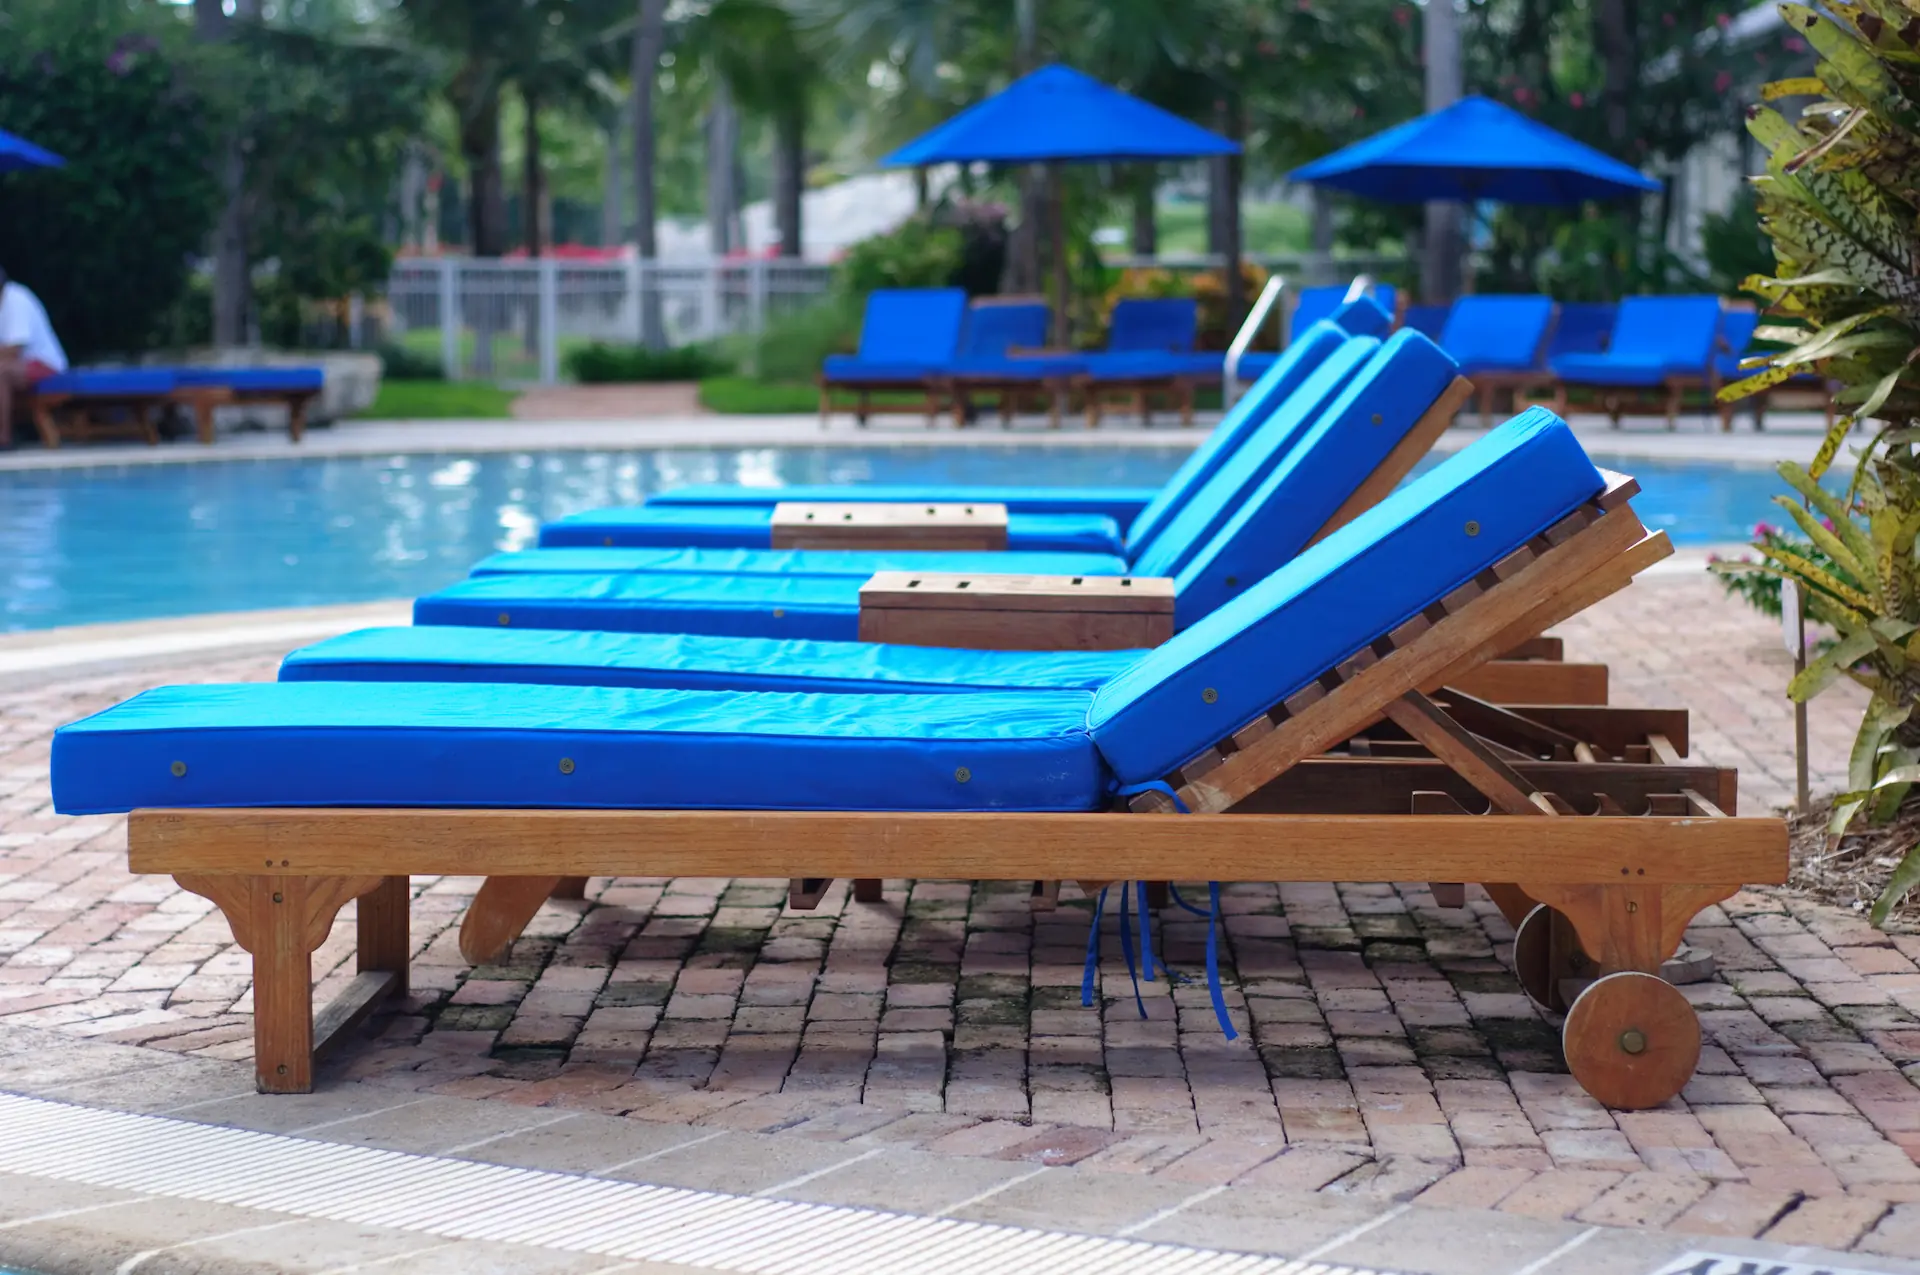 Profile of a row of wooden poolside lounge chairs with blue cushions. These are one of the options to consider in the in-pool chairs vs. poolside lounge chairs decision.